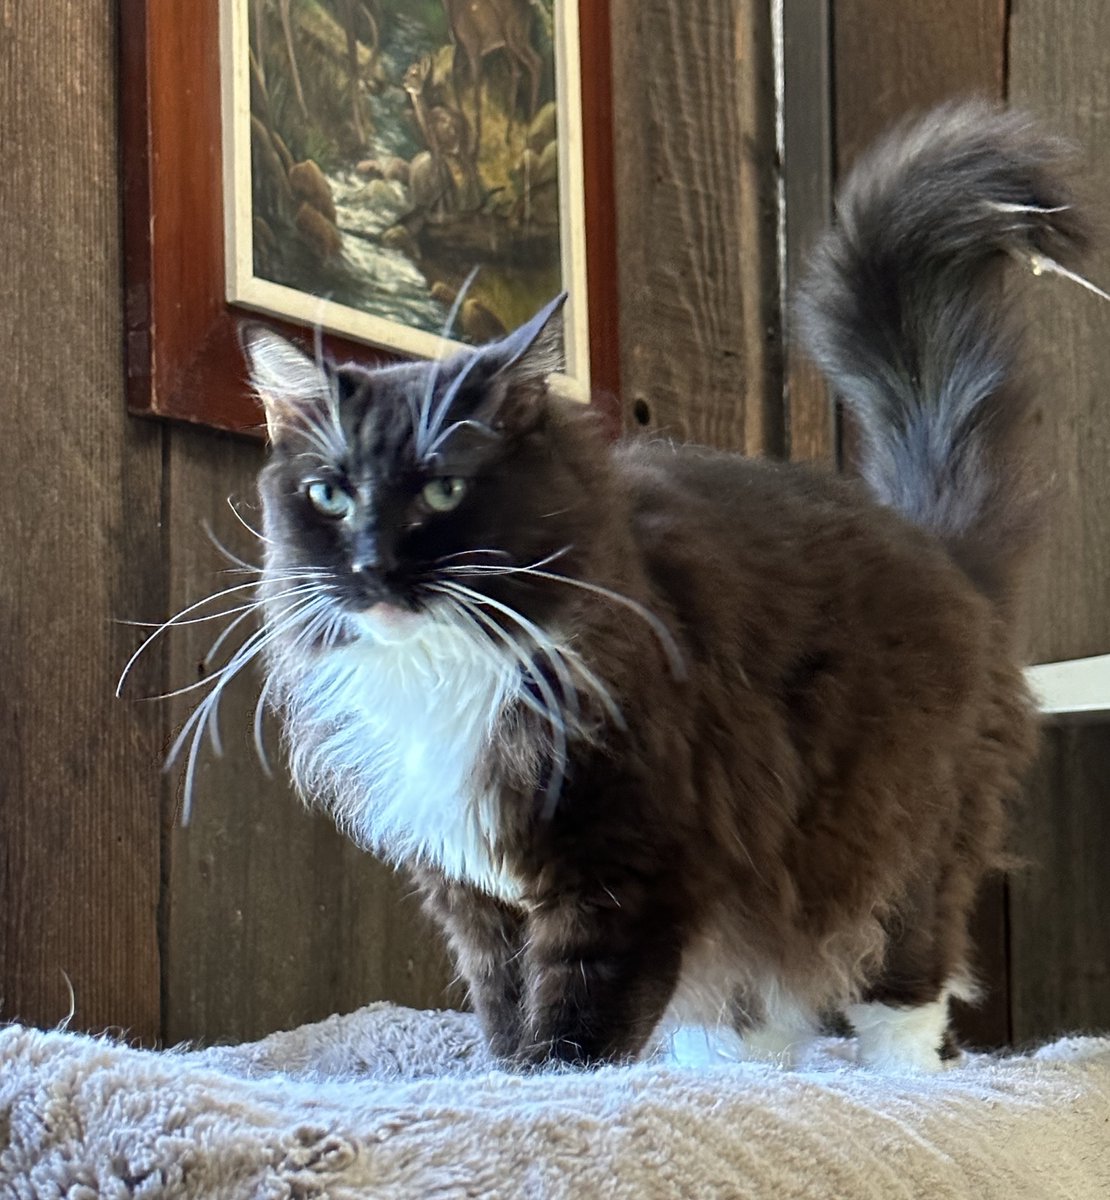 #Lodi, CA:  Hi, my name is RUBY!  As you might guess from my beautiful ruff, big fluffy tail & large paws, I am a #MaineCoon mix.  (And did you notice my extra-long whiskers?!)

I am a talkative and social girl born in 2016... adoptrescuecatsinca.com
#RehomeHour #US #cats #adopt